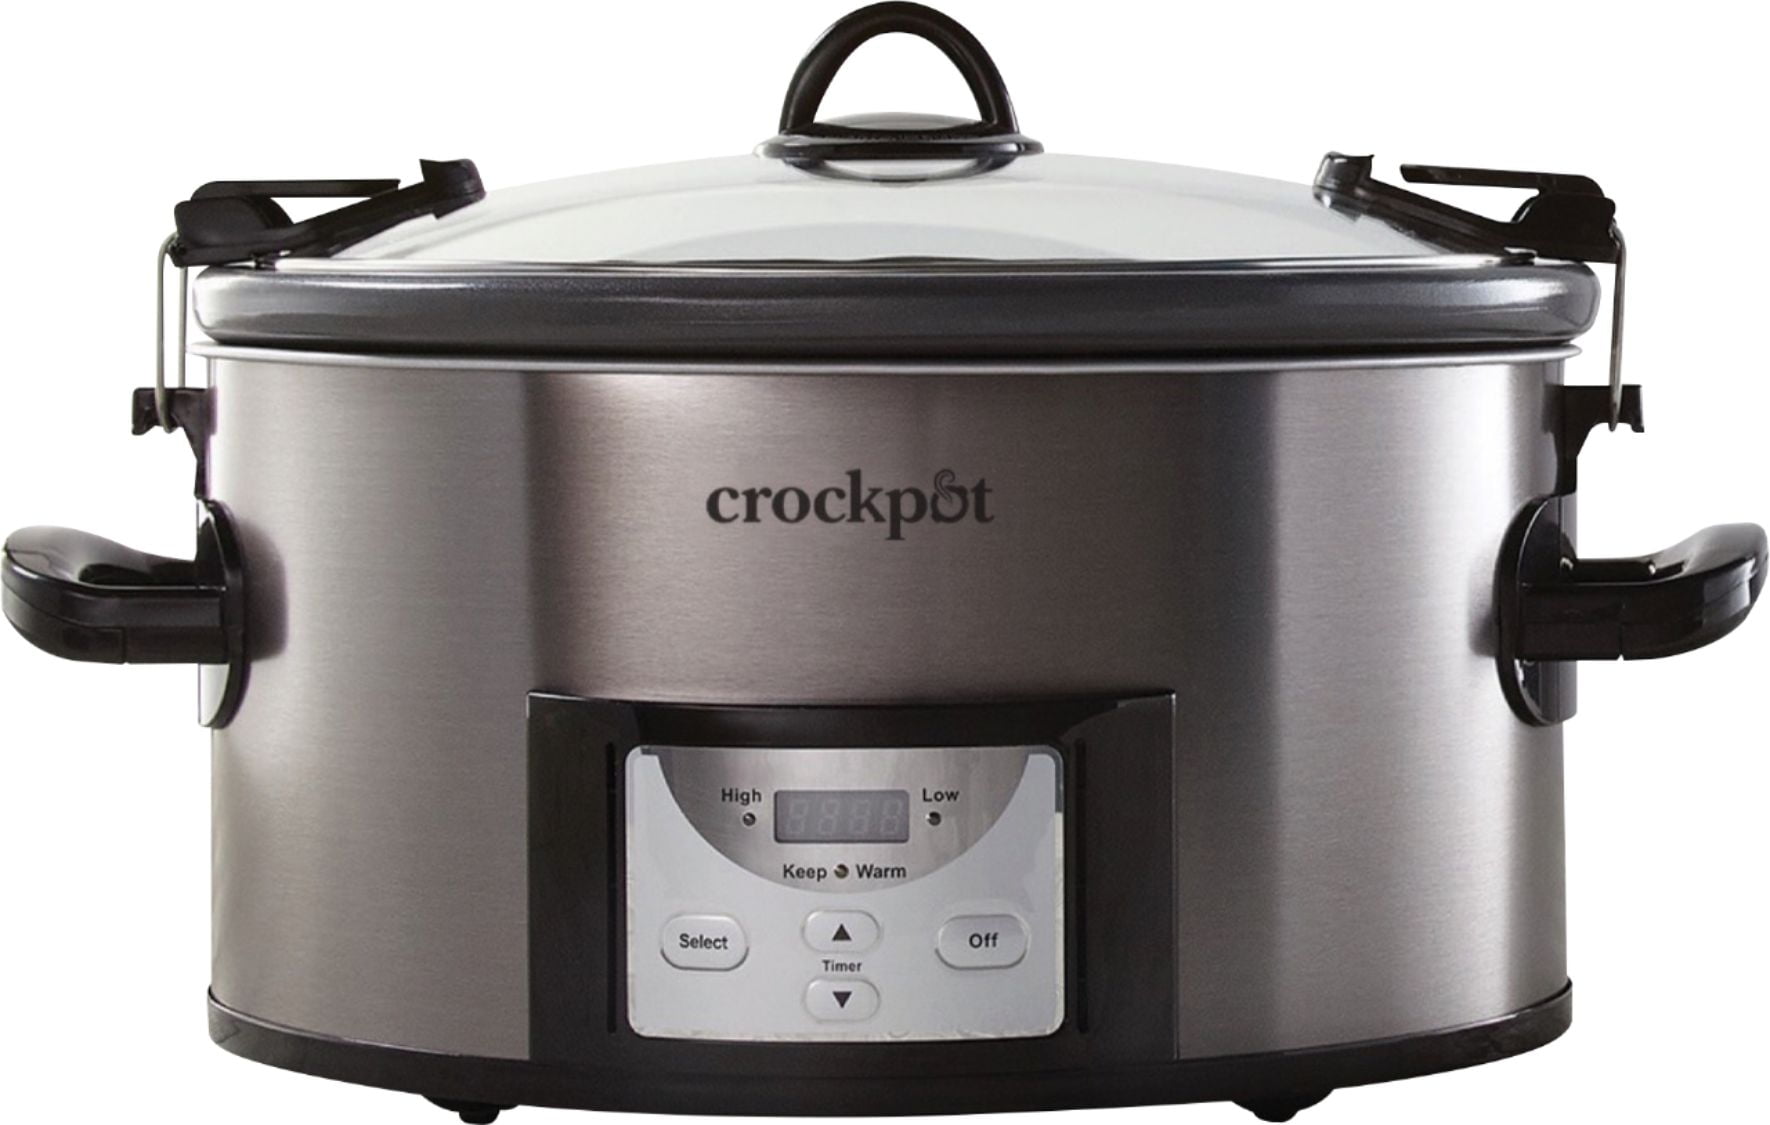 Crock Pot 7qt Cook & Carry Programmable Easy-Clean Slow Cooker - Stainless Steel